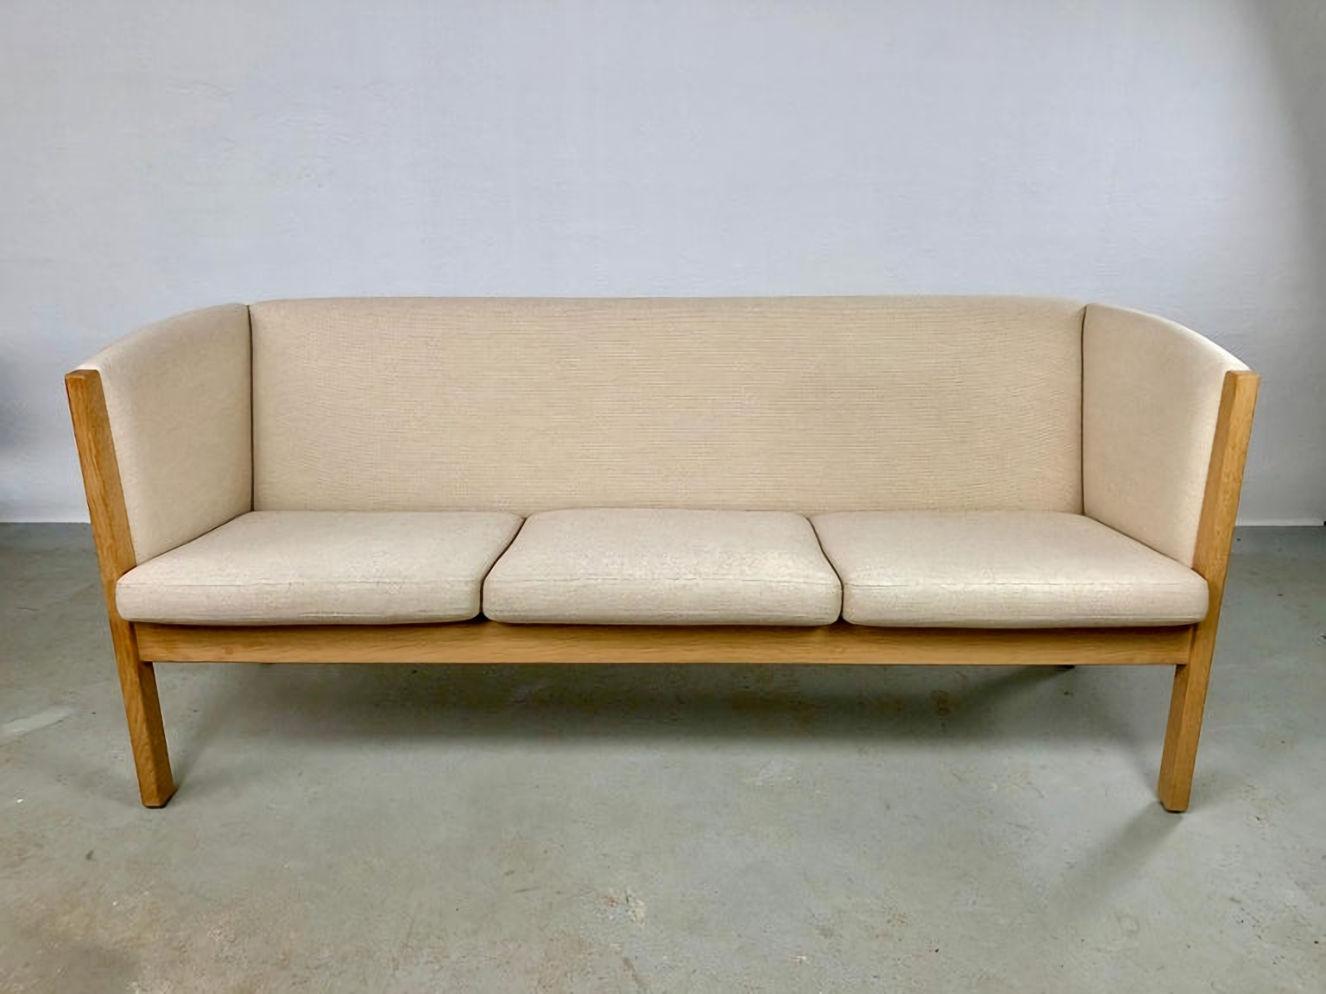 Danish Hans J. Wegner three-seat sofa in oak and fabric by GETAMA

The model GE-285 sofa was designed by Hans J. Wegner in 1985.

The simple yet very elegant Wegner design feature a strong oak frame with small details and the original cushions are